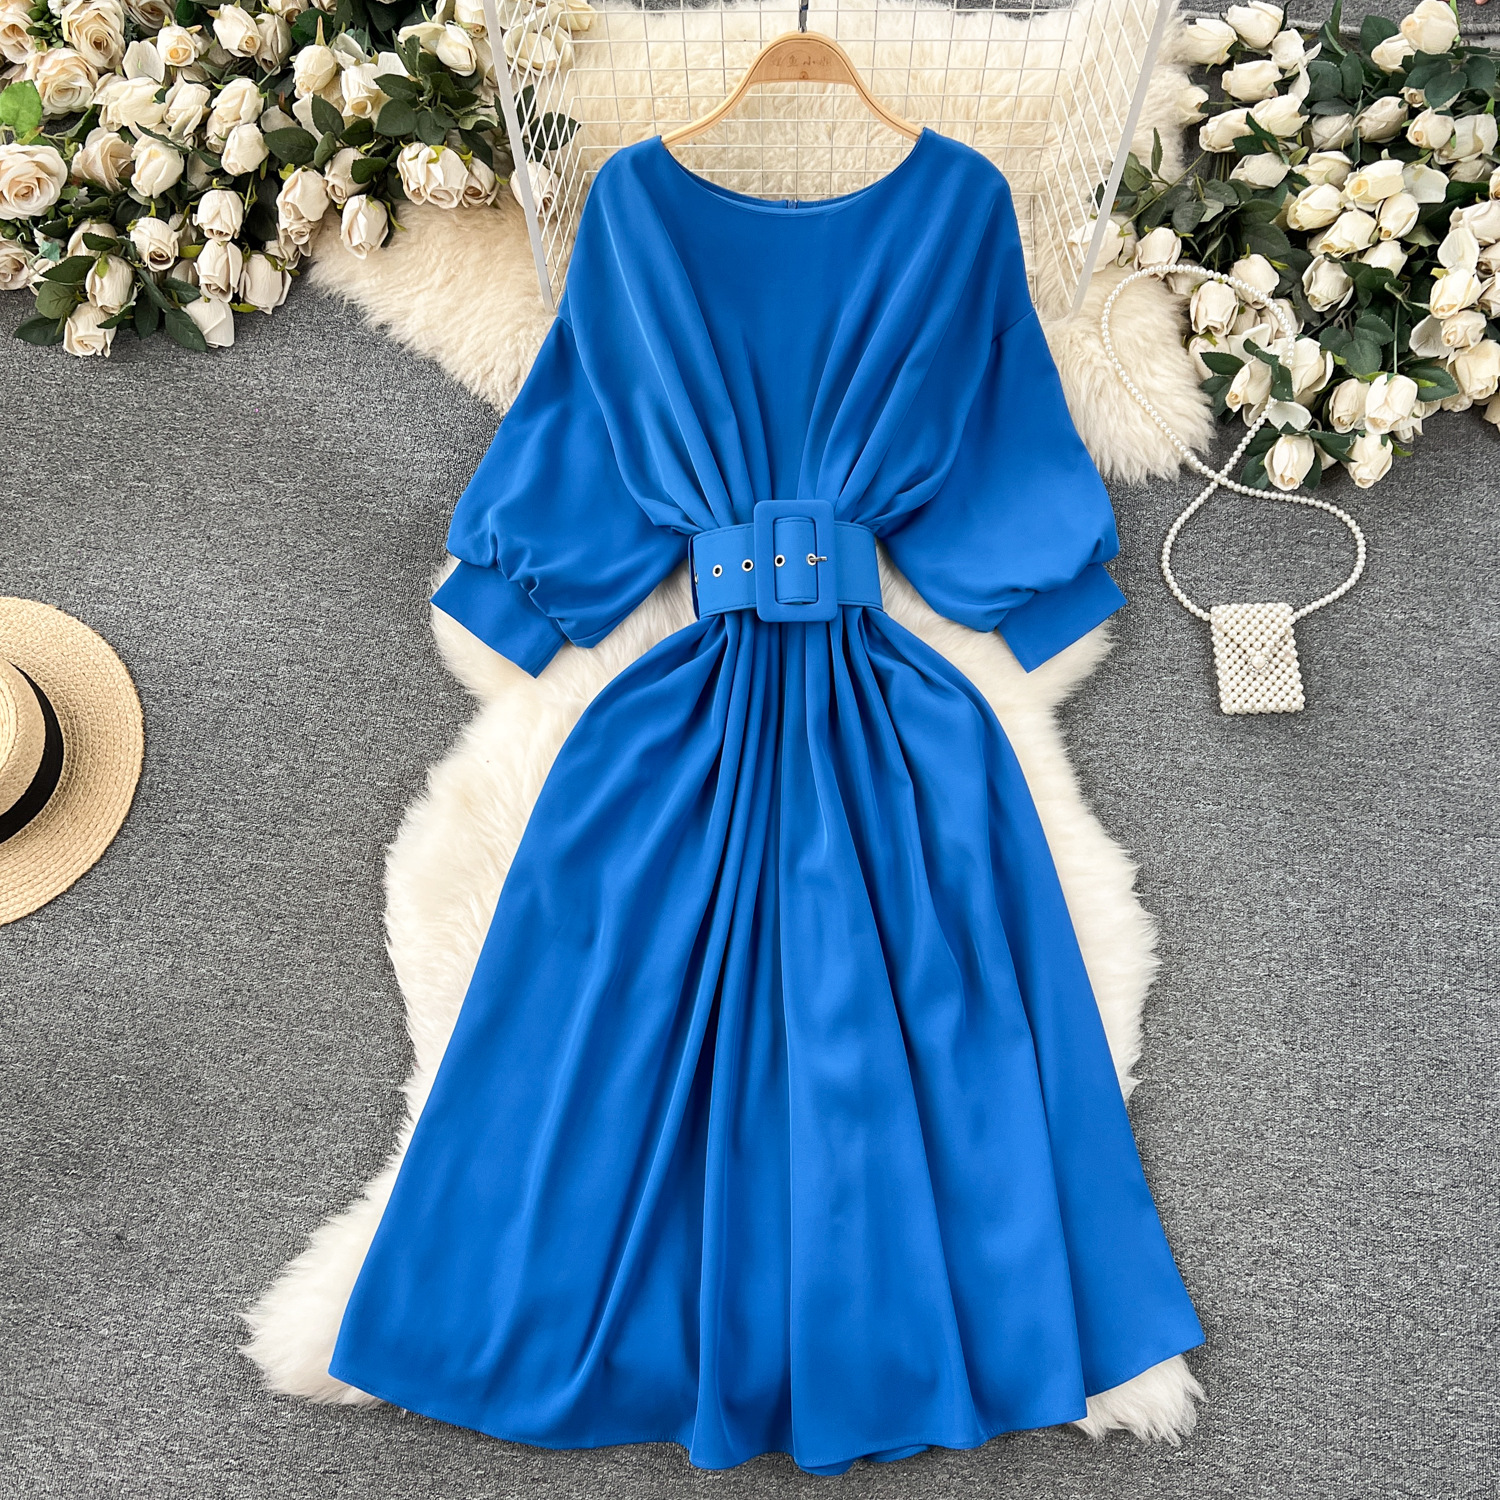 Light and mature style, wearing a sophisticated round necked Chinese pleated waist, slimming and loose fitting bat sleeved haute couture dress